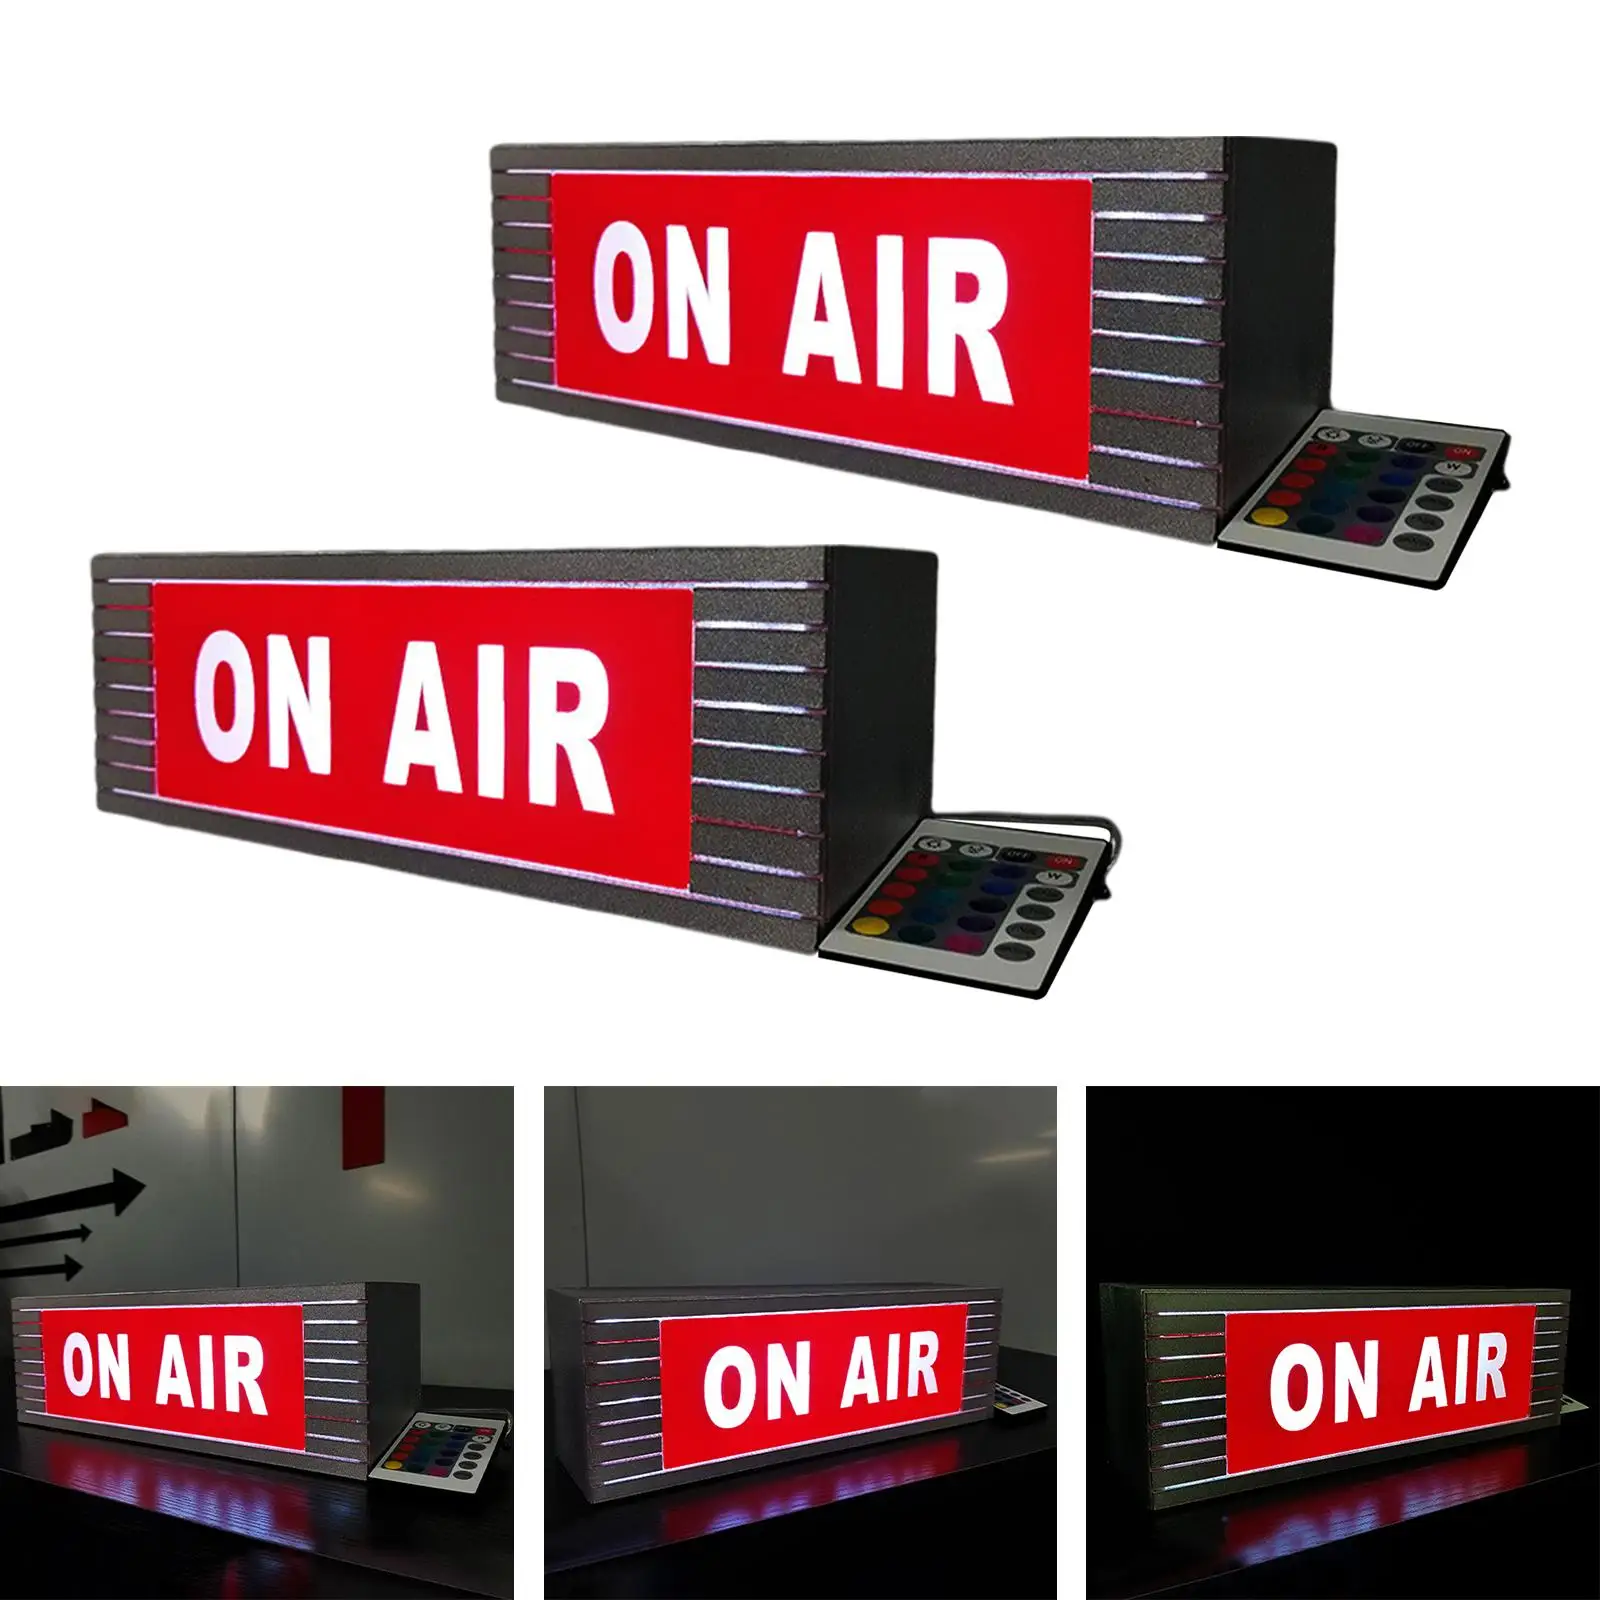 On Air Studio LED Neon Light Sign Box Remote Control Wall Decor Podcasting